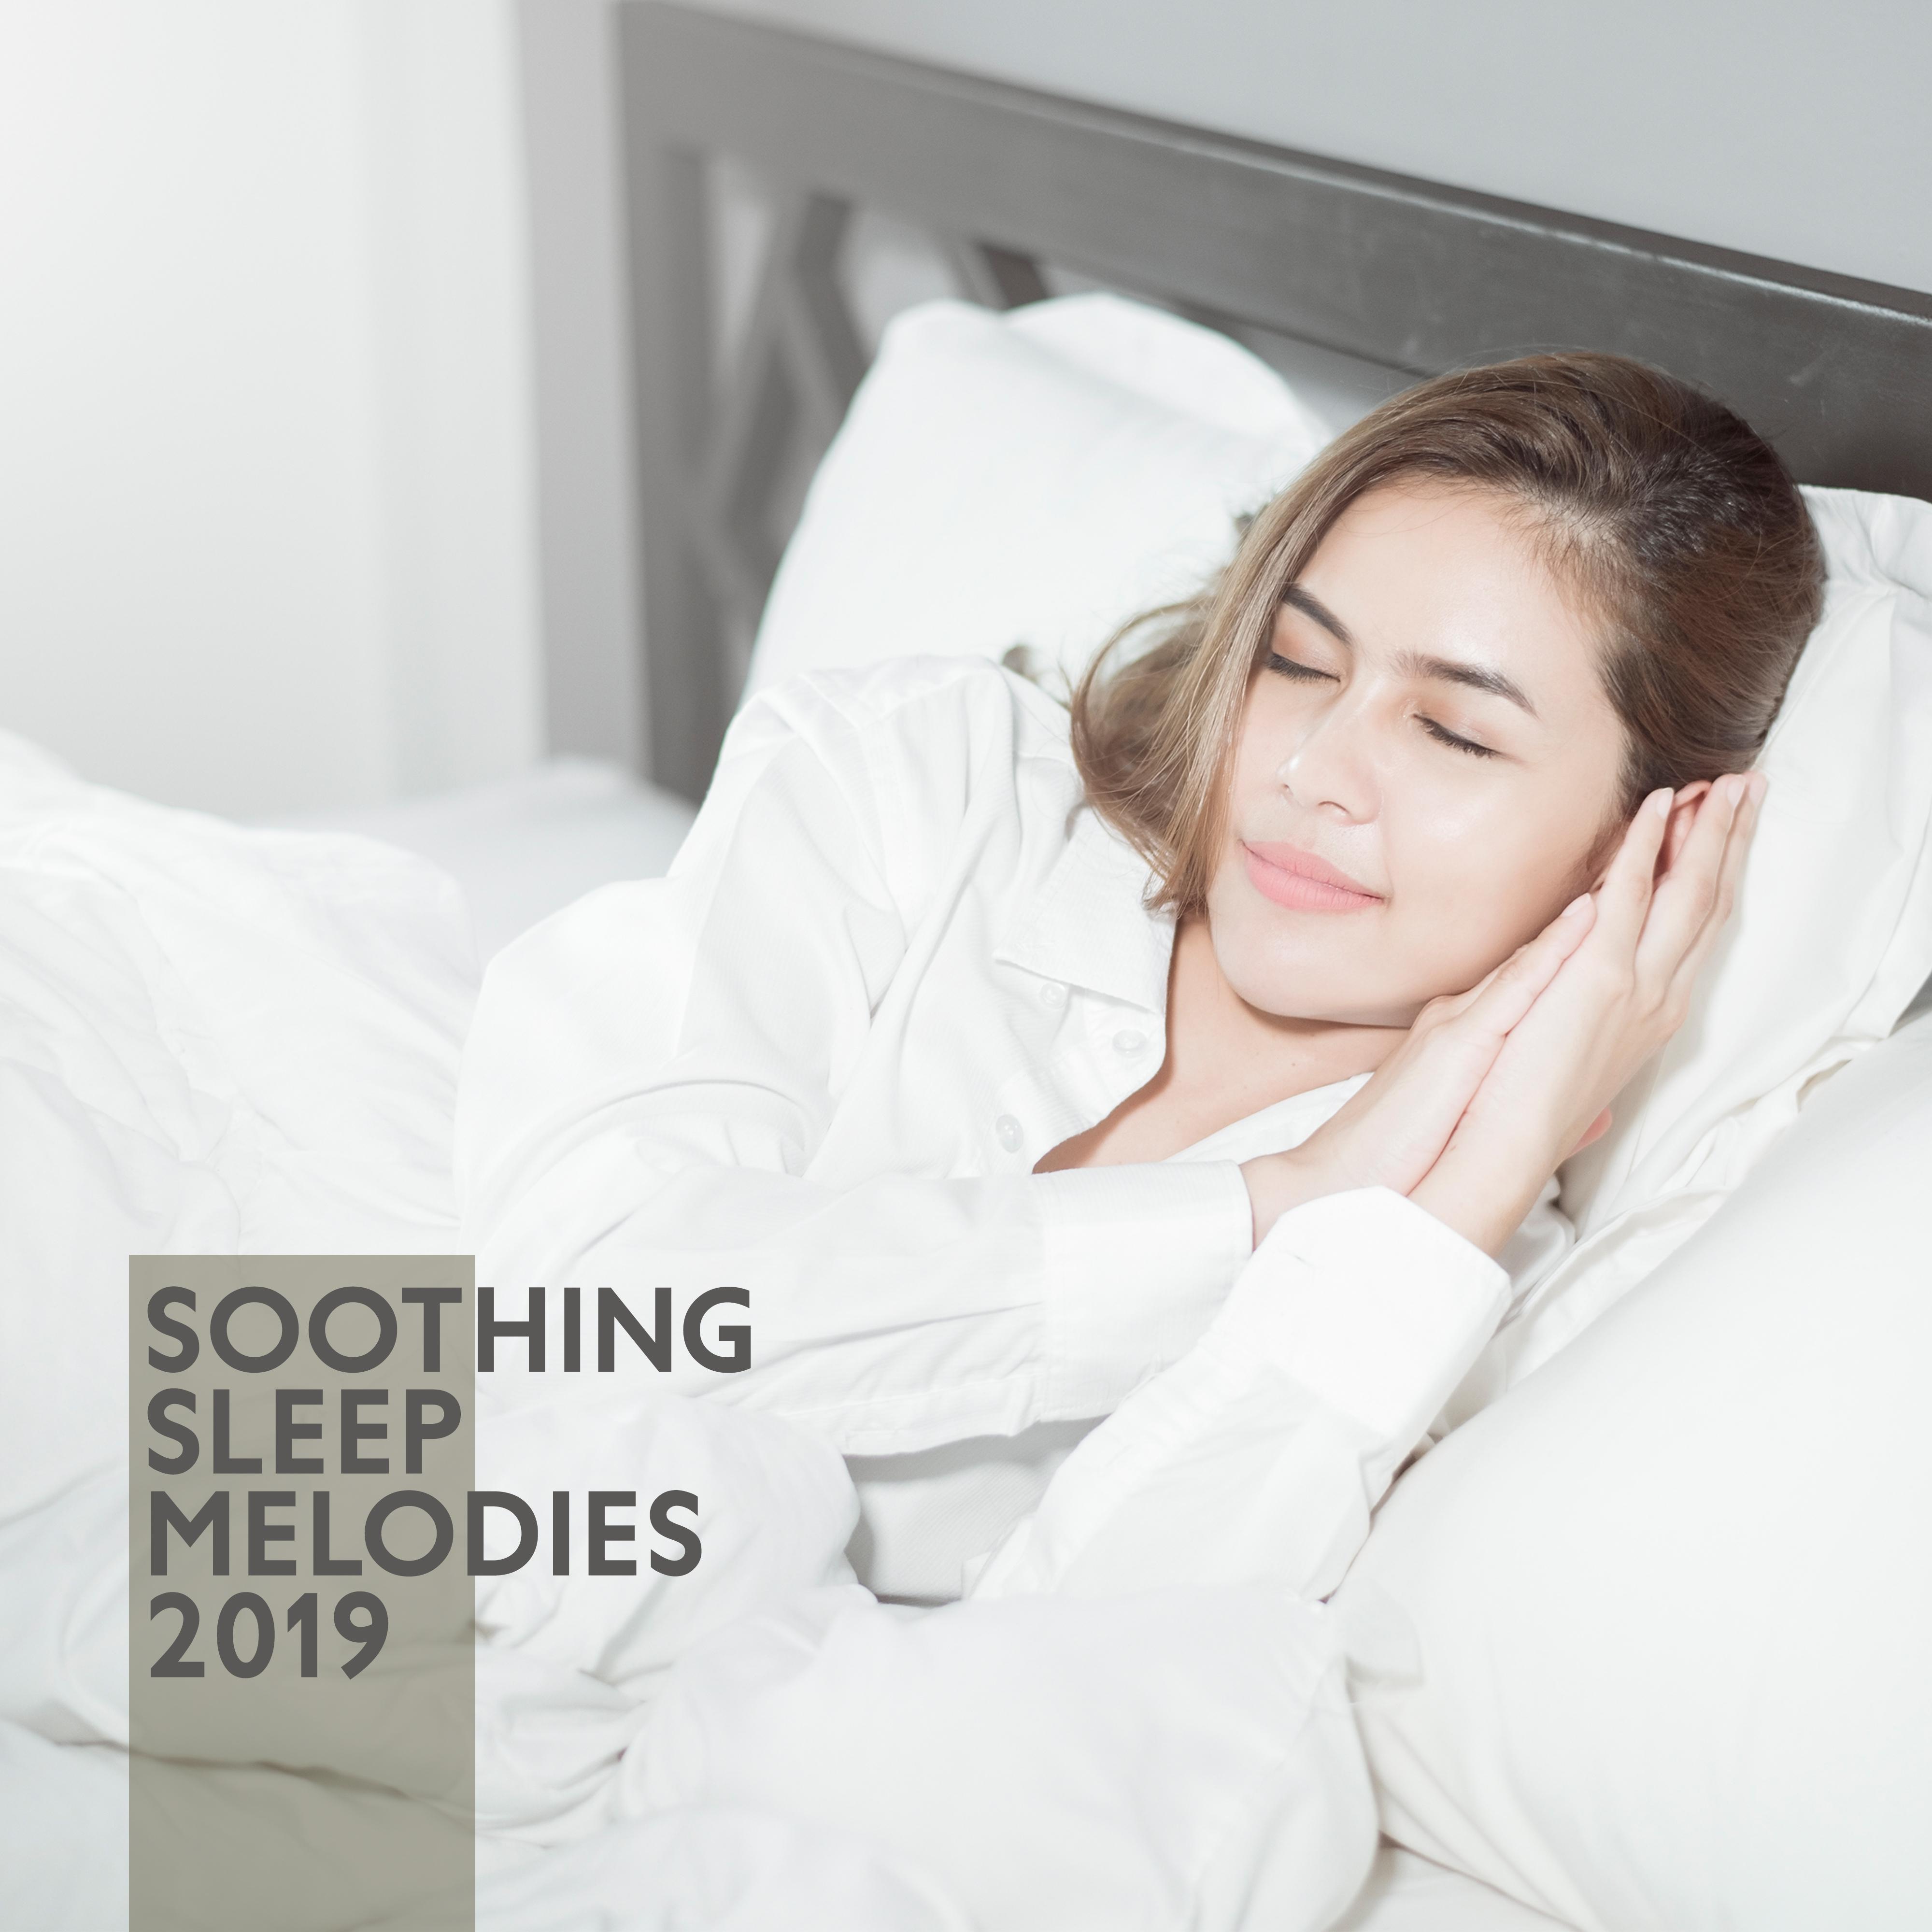 Soothing Sleep Melodies 2019 – Calming Sounds for Deeper Sleep, Relaxation, Meditation, Zen Lounge, Pure Therapy, Music for Mind